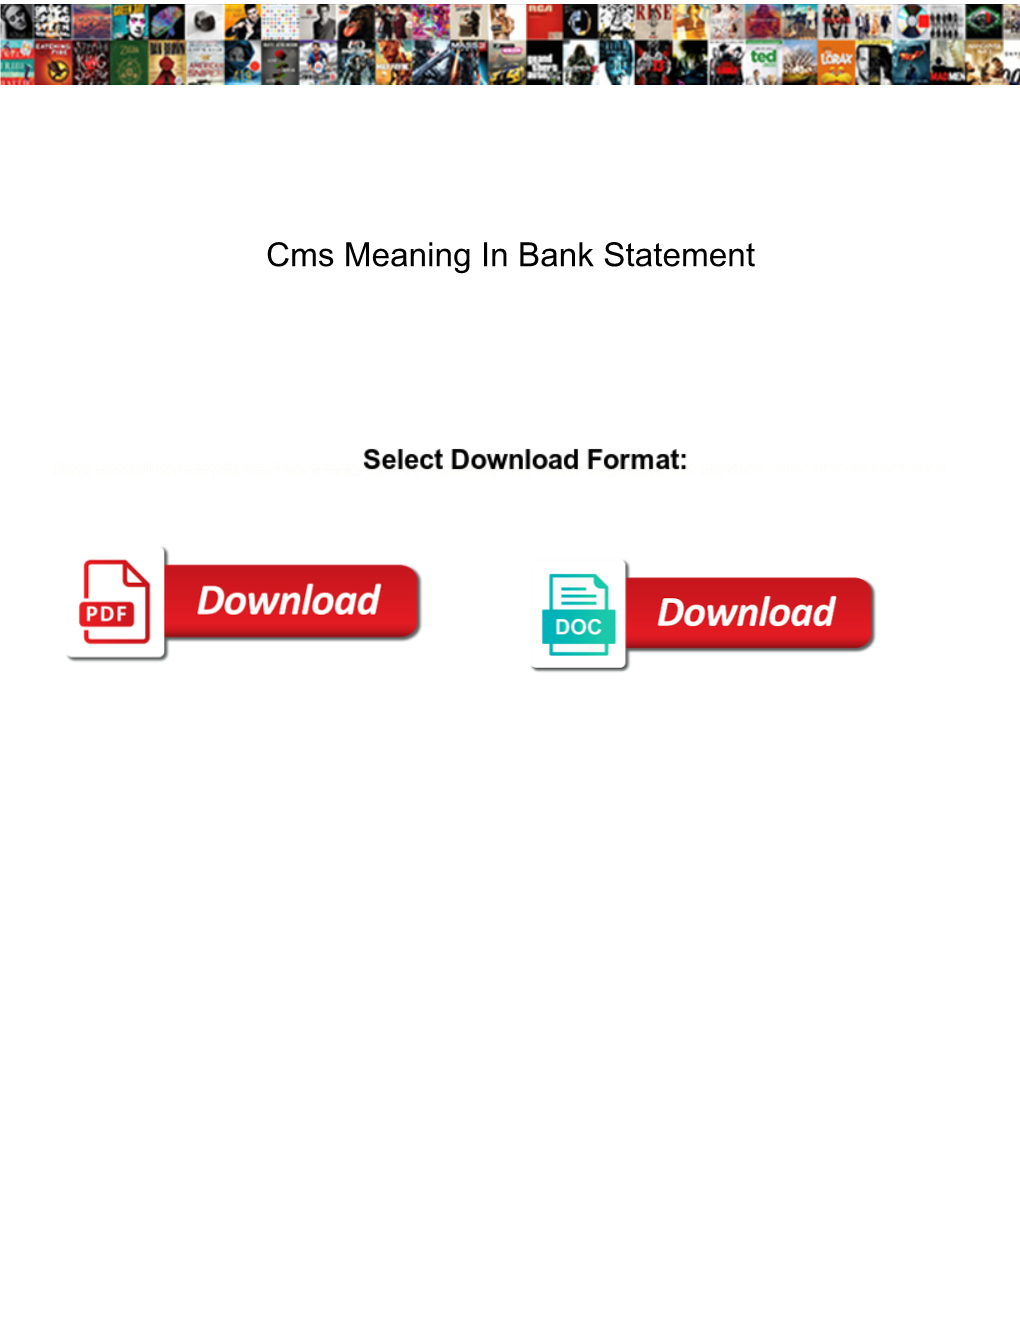 cms-meaning-in-bank-statement-docslib